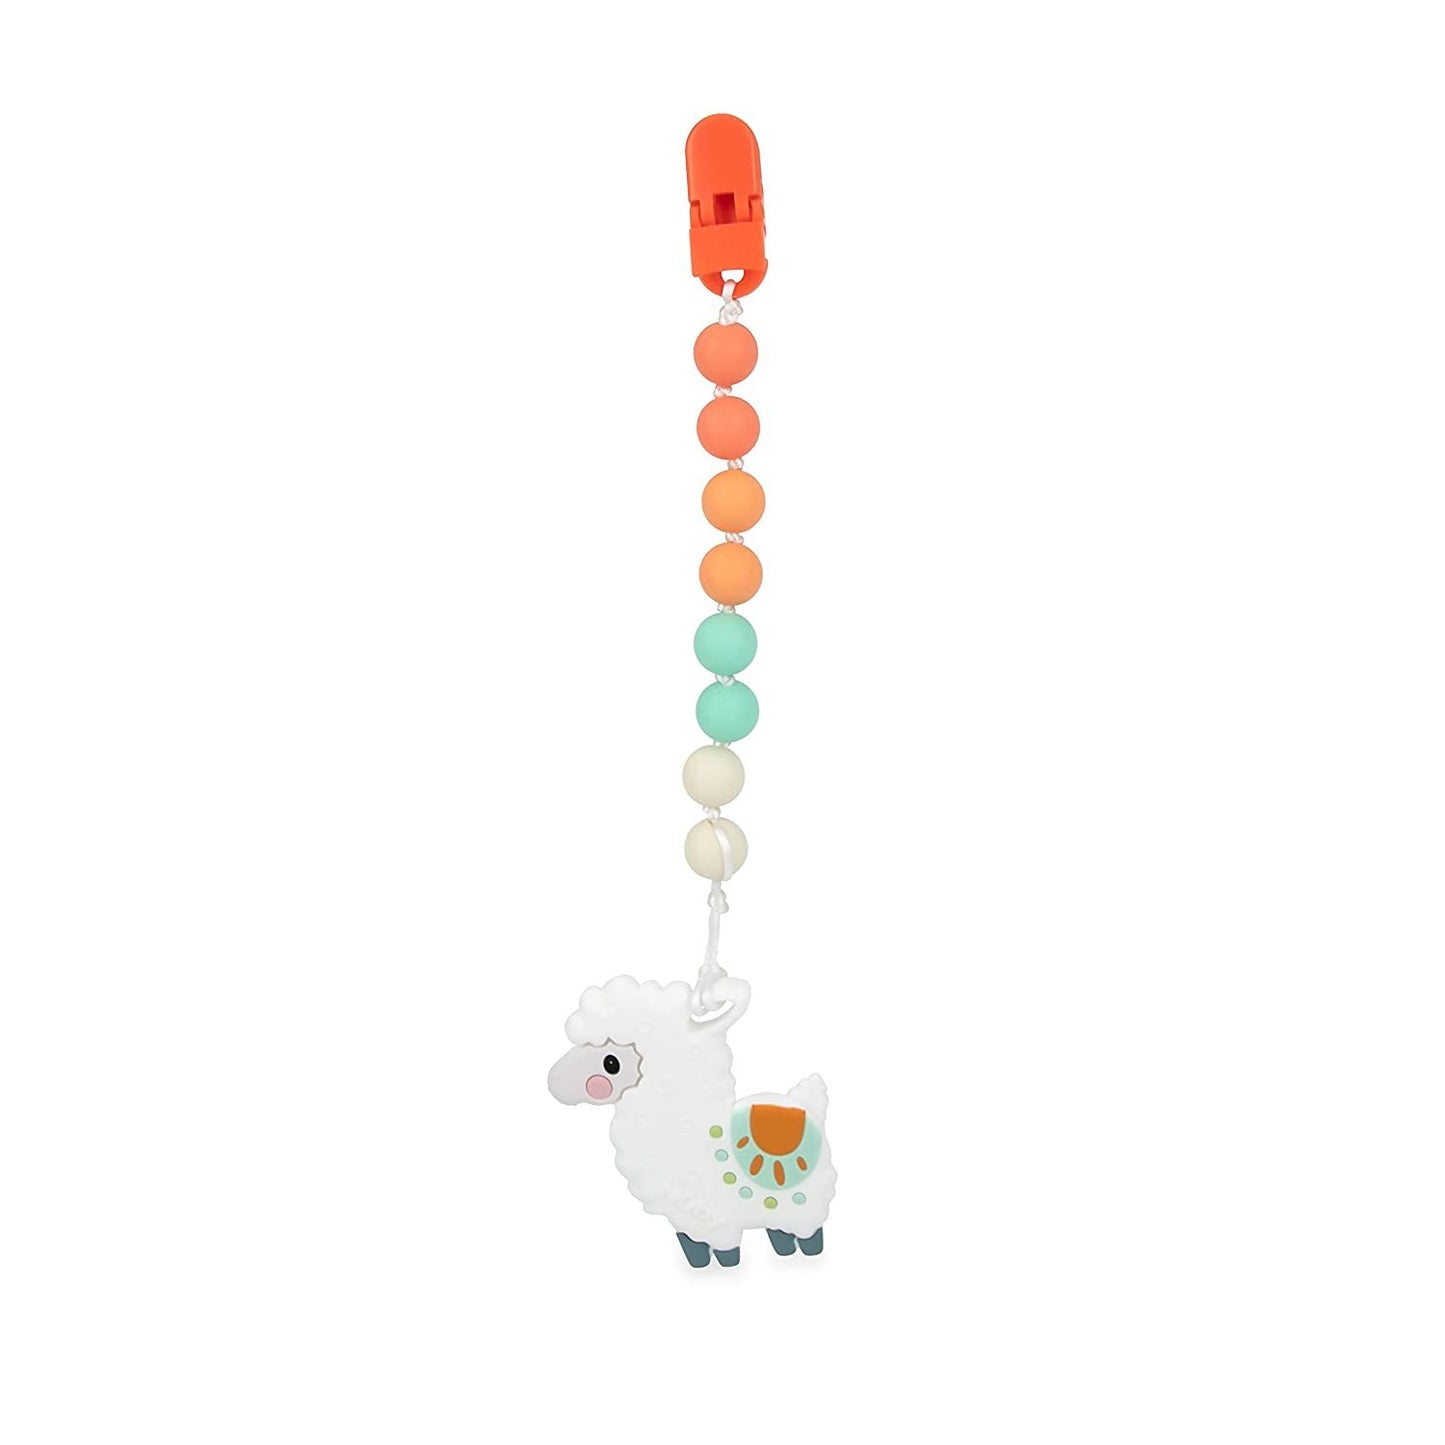 Nuby All Silicone Teether with Bonus Silicone Pacifinder with Clip - 3+ Months, 1pk, Assorted Neutral Designs